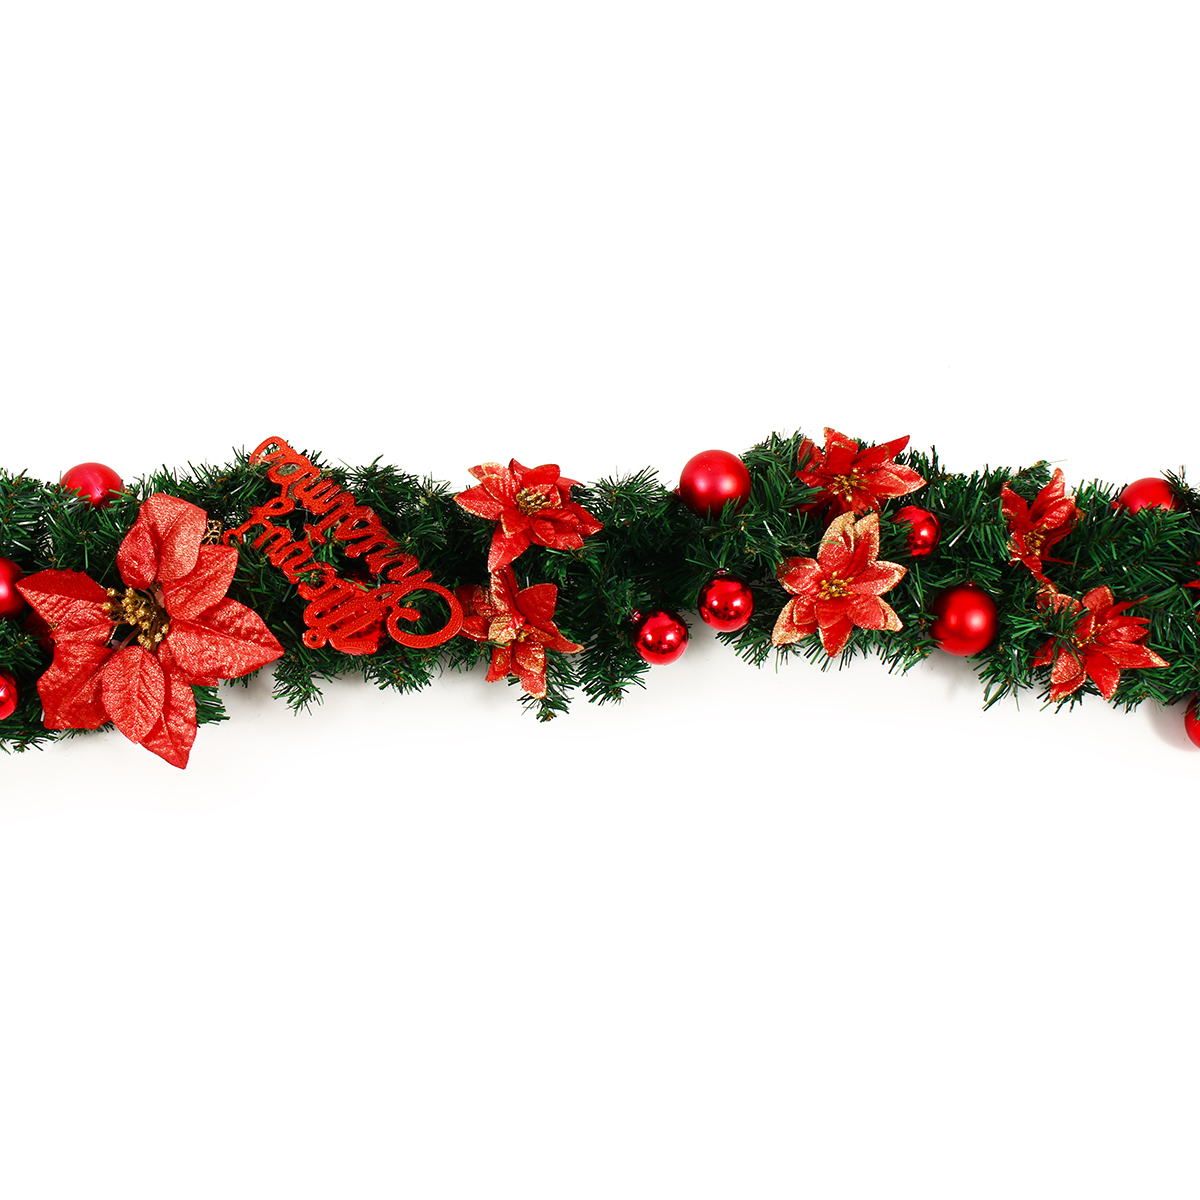 27M-Christmas-Garland-Party-Atificial-Rattan-Bow-Home-Wall-Ornament-Decorations-1363206-6